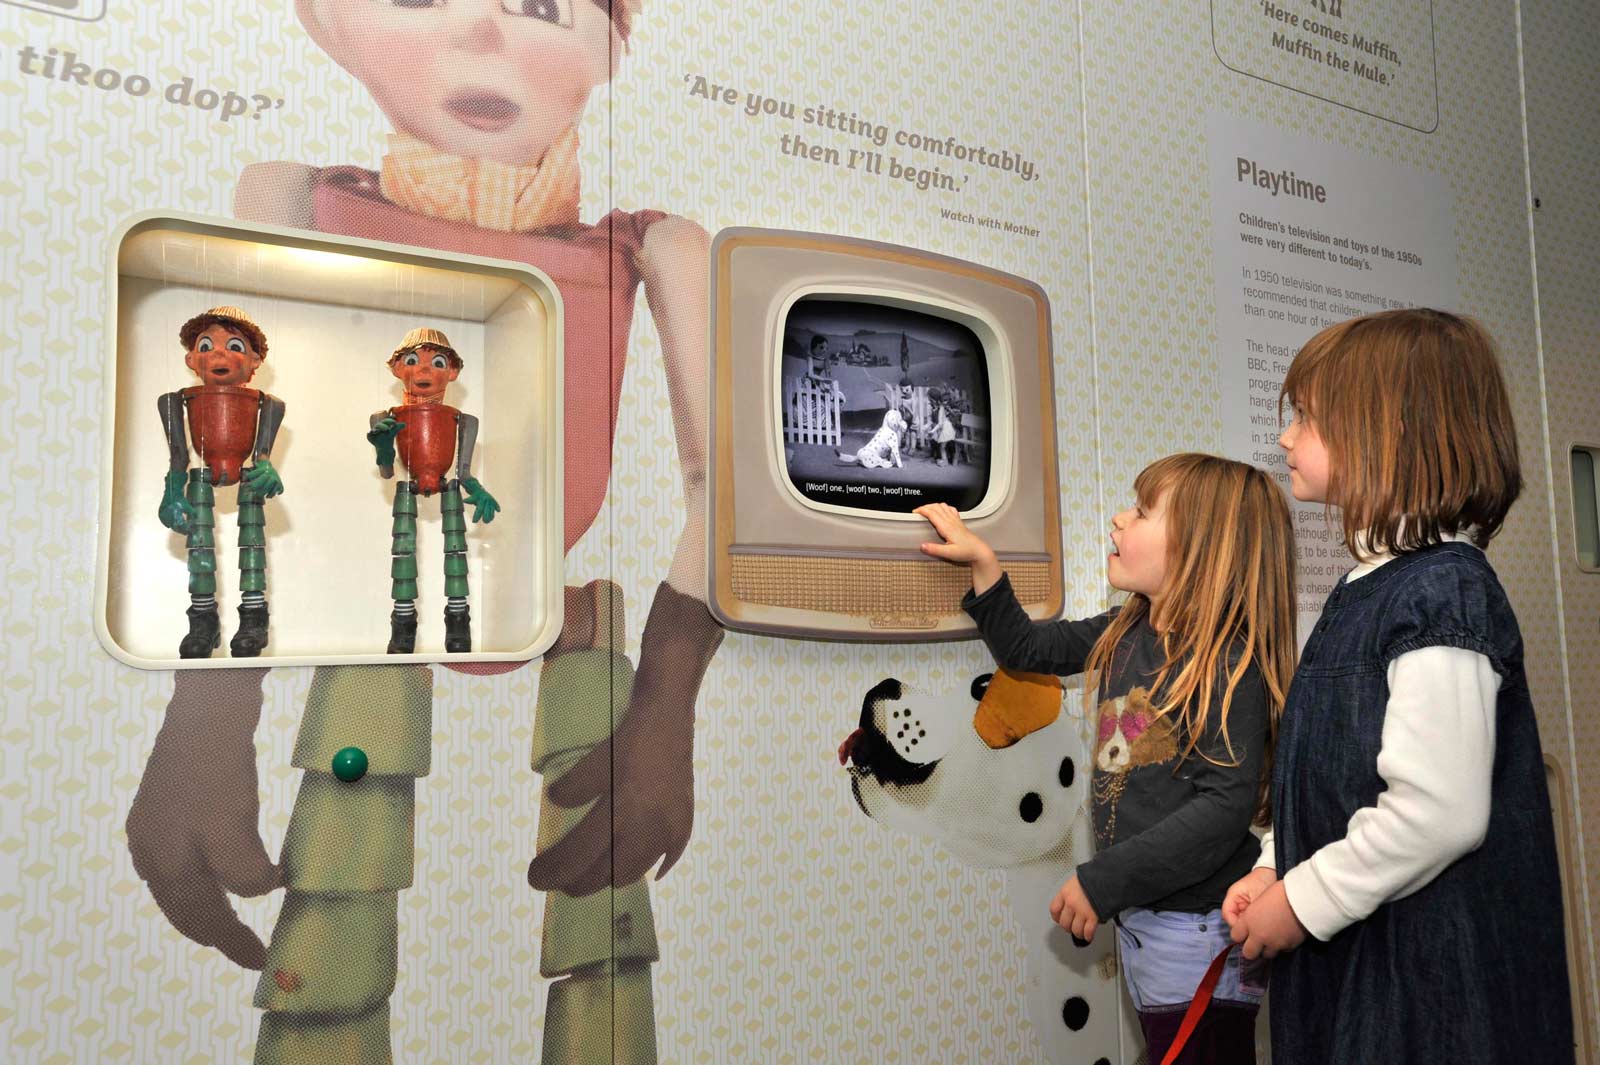 Children look at the Bill and Ben Flowerpot Men puppets on display in the World City gallery.